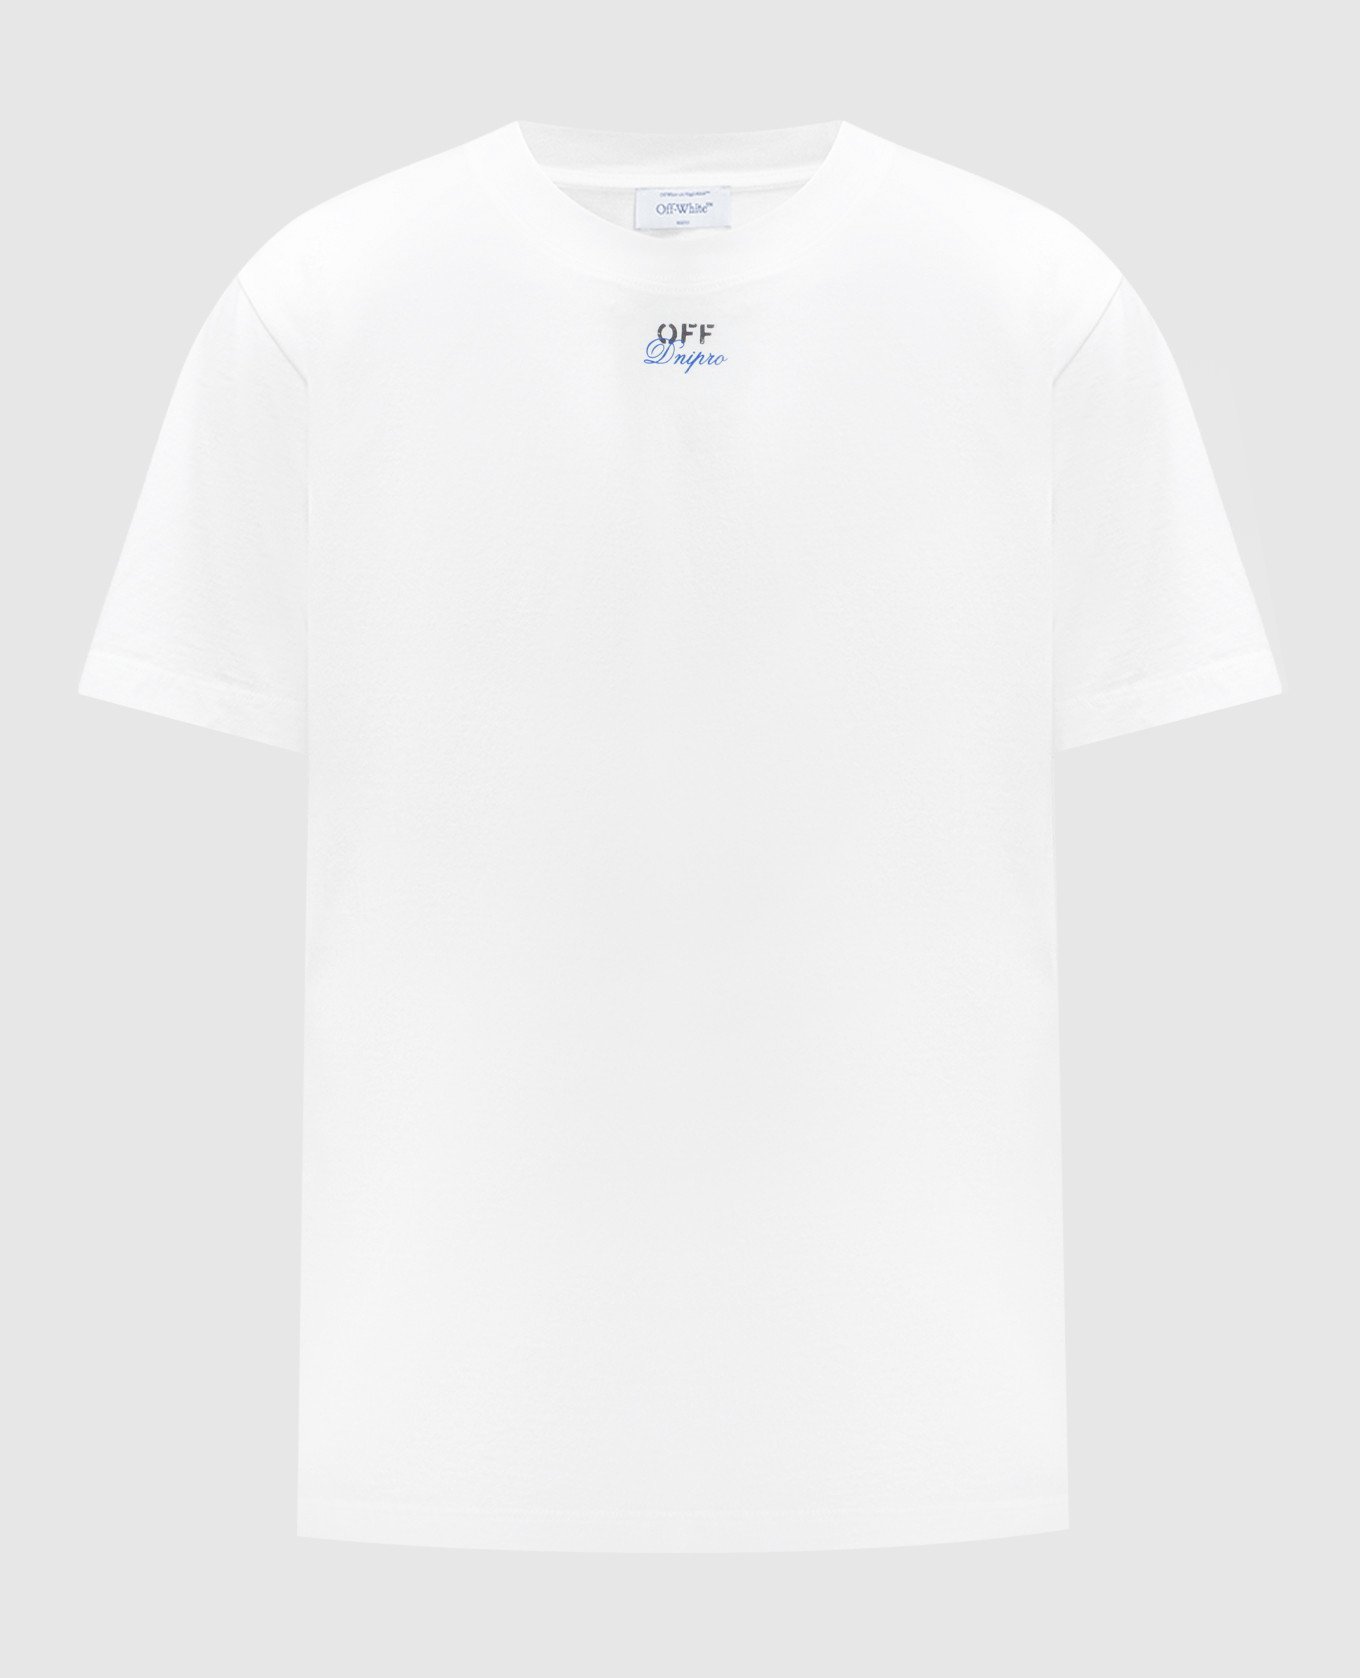 White t-shirt with Off-White Dnipro print